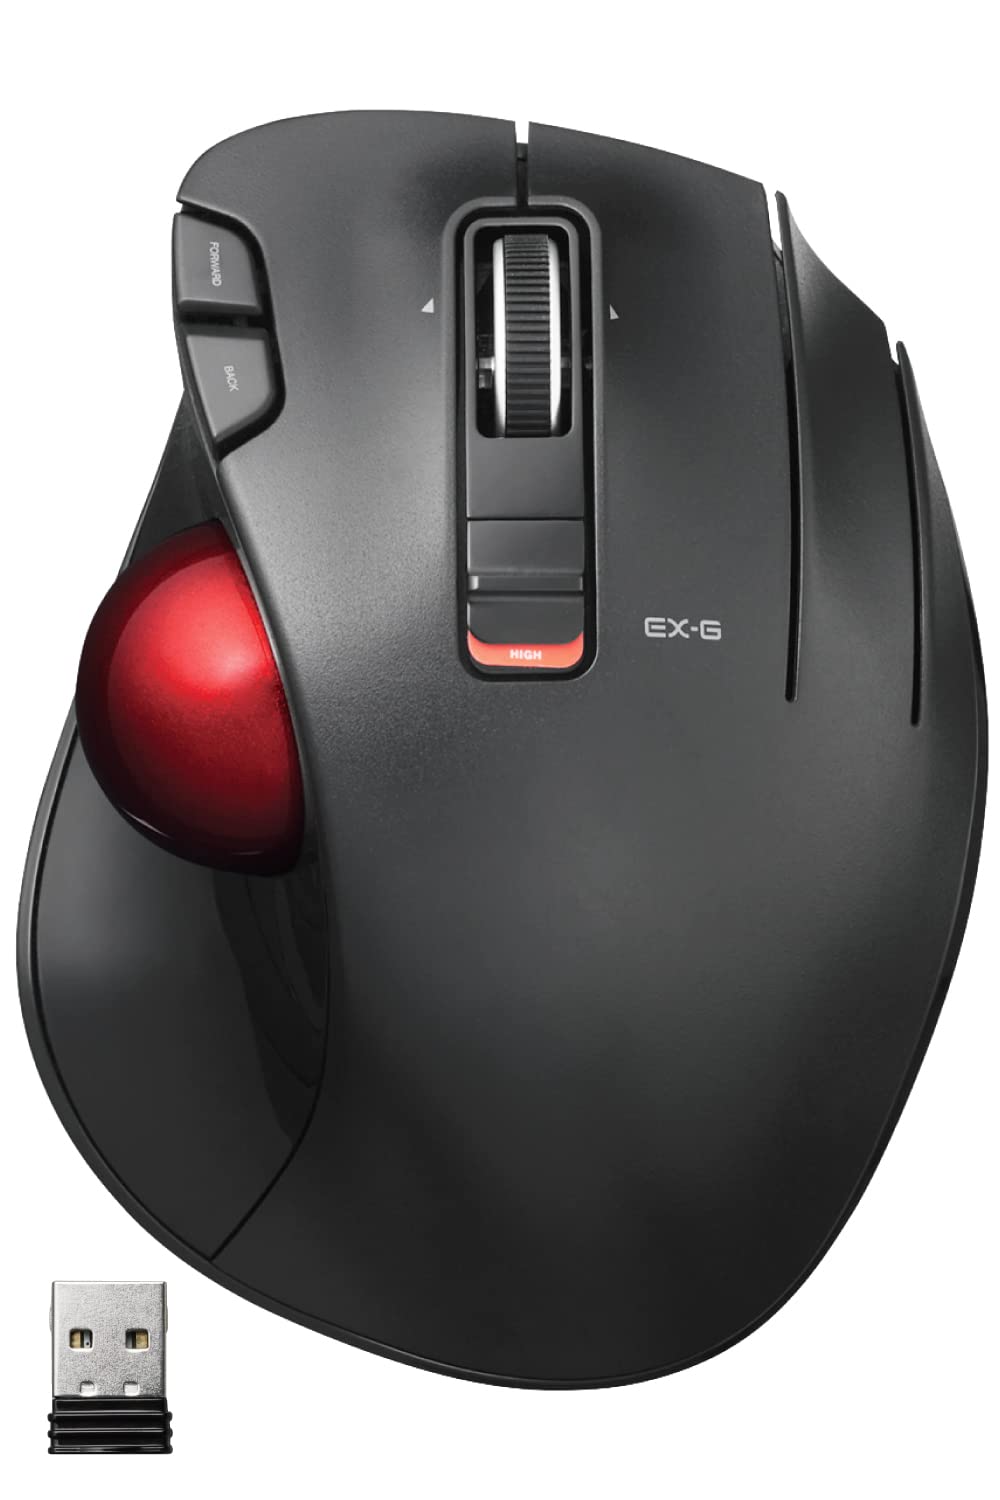 ELECOM Wireless Trackball Mouse, Ergonomic Mouse Thumb Control & Red Ball Smooth Tracking, 6-Button, Optical Sensor with Tilt Wheel, Windows, macOS, Compatible for PC, Laptop, Mac、EX-G (M-XT3DRBK-G)